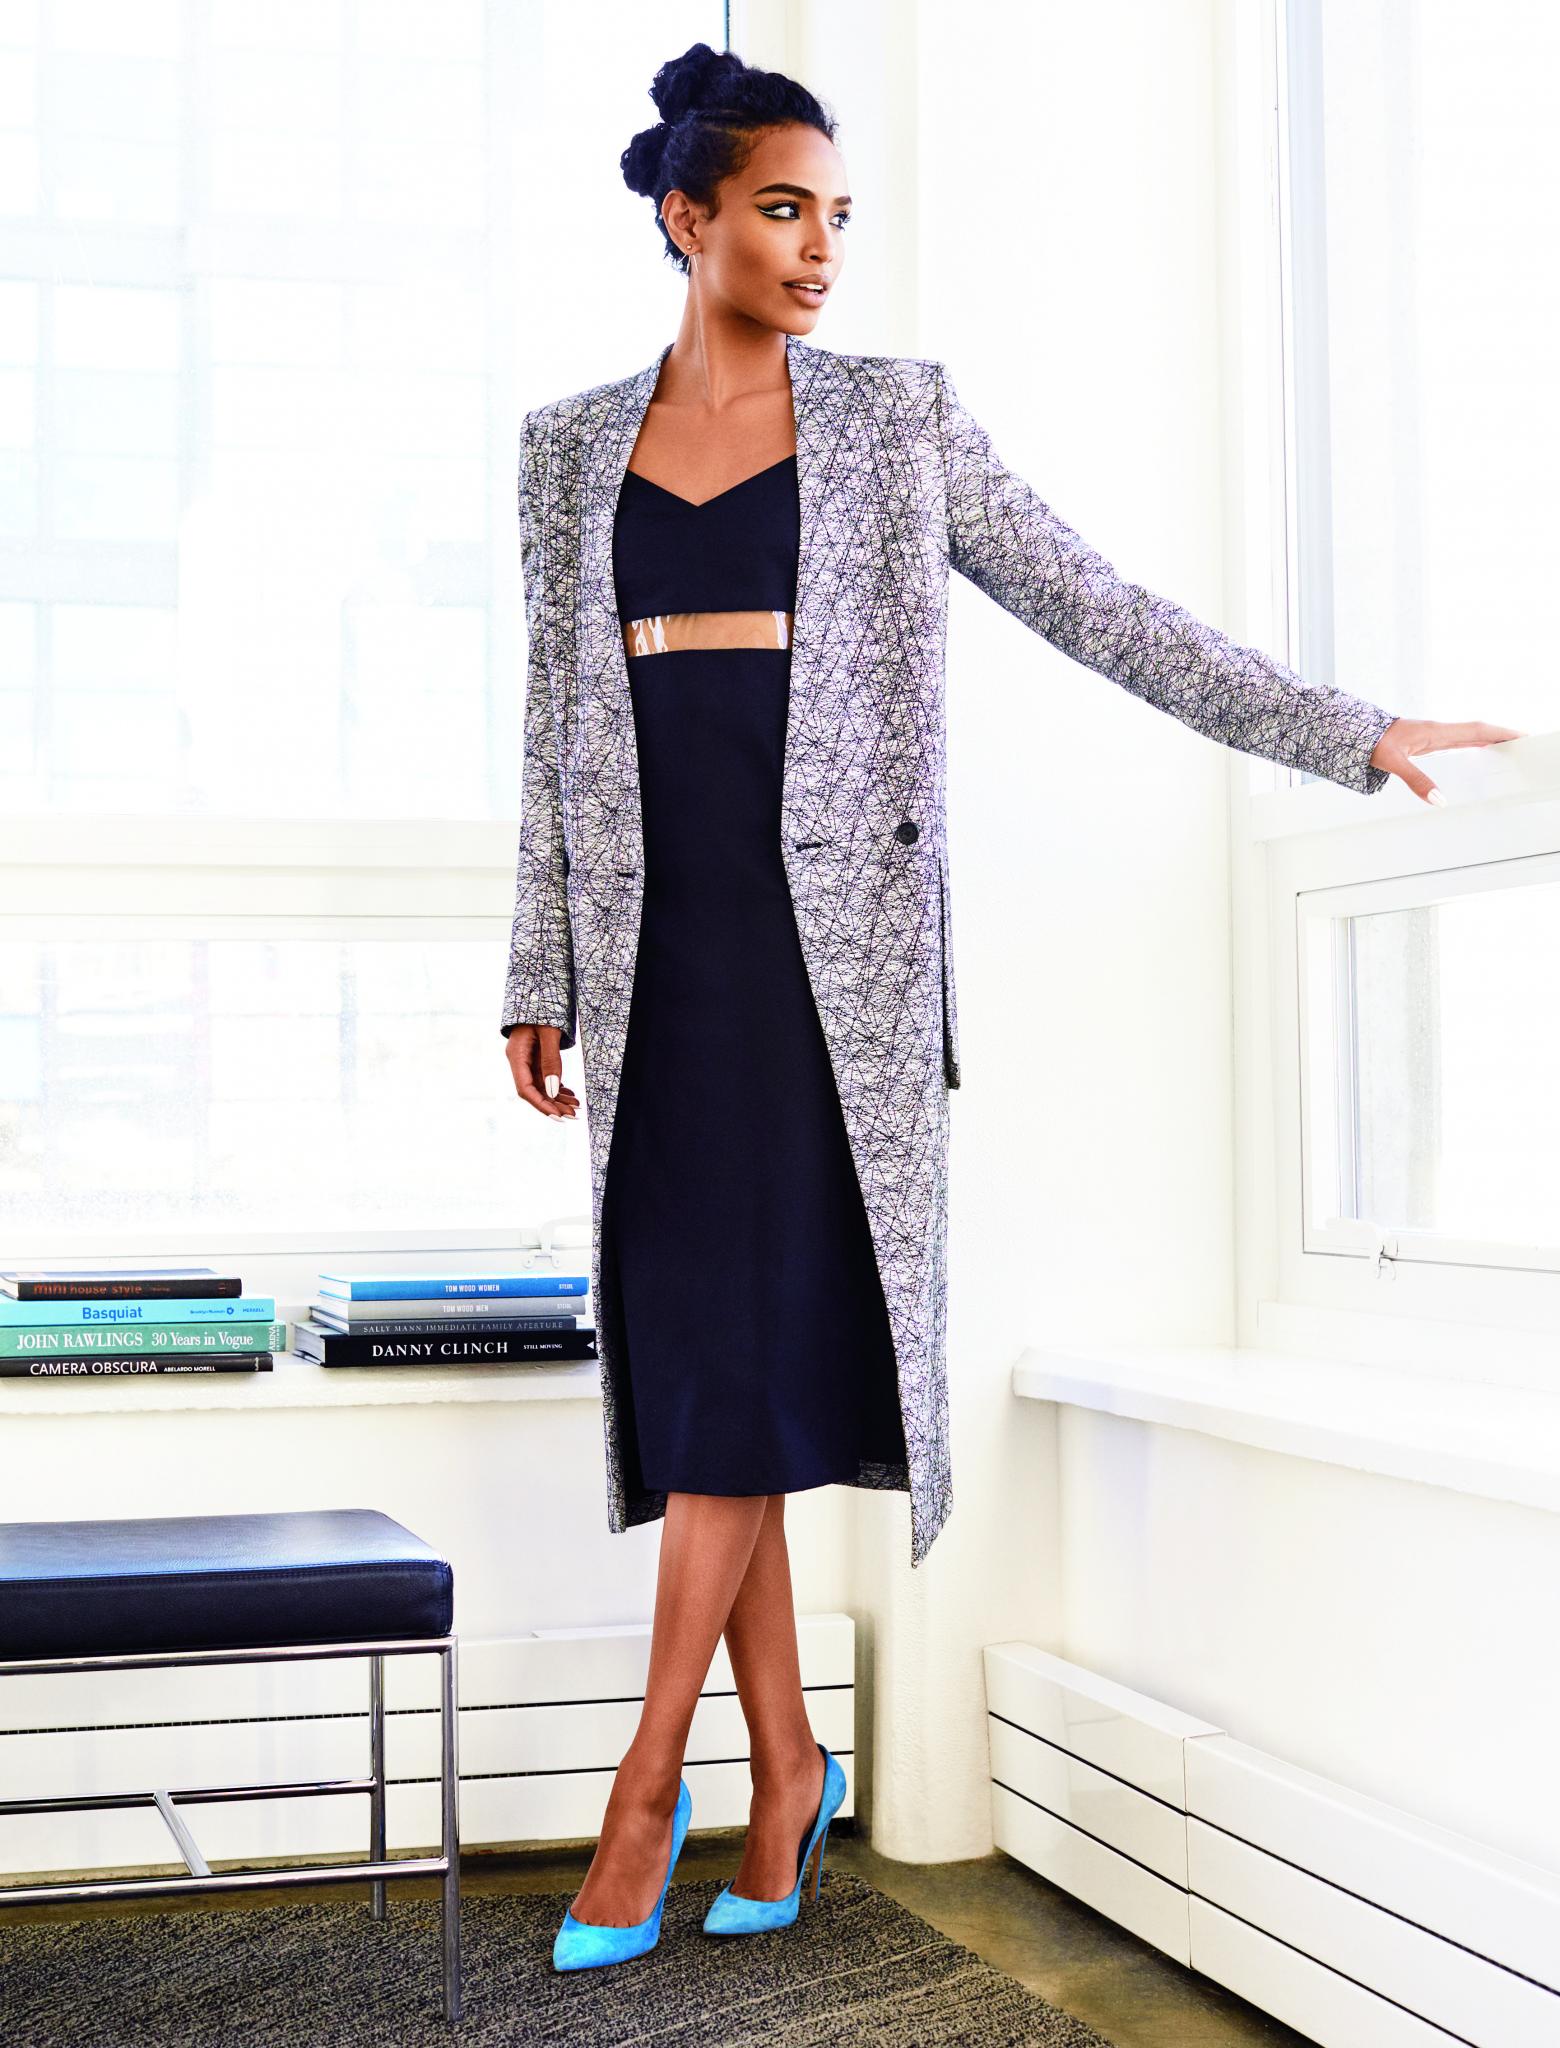 Work It, Girl: Office Wear That Won’t Cramp Your Style